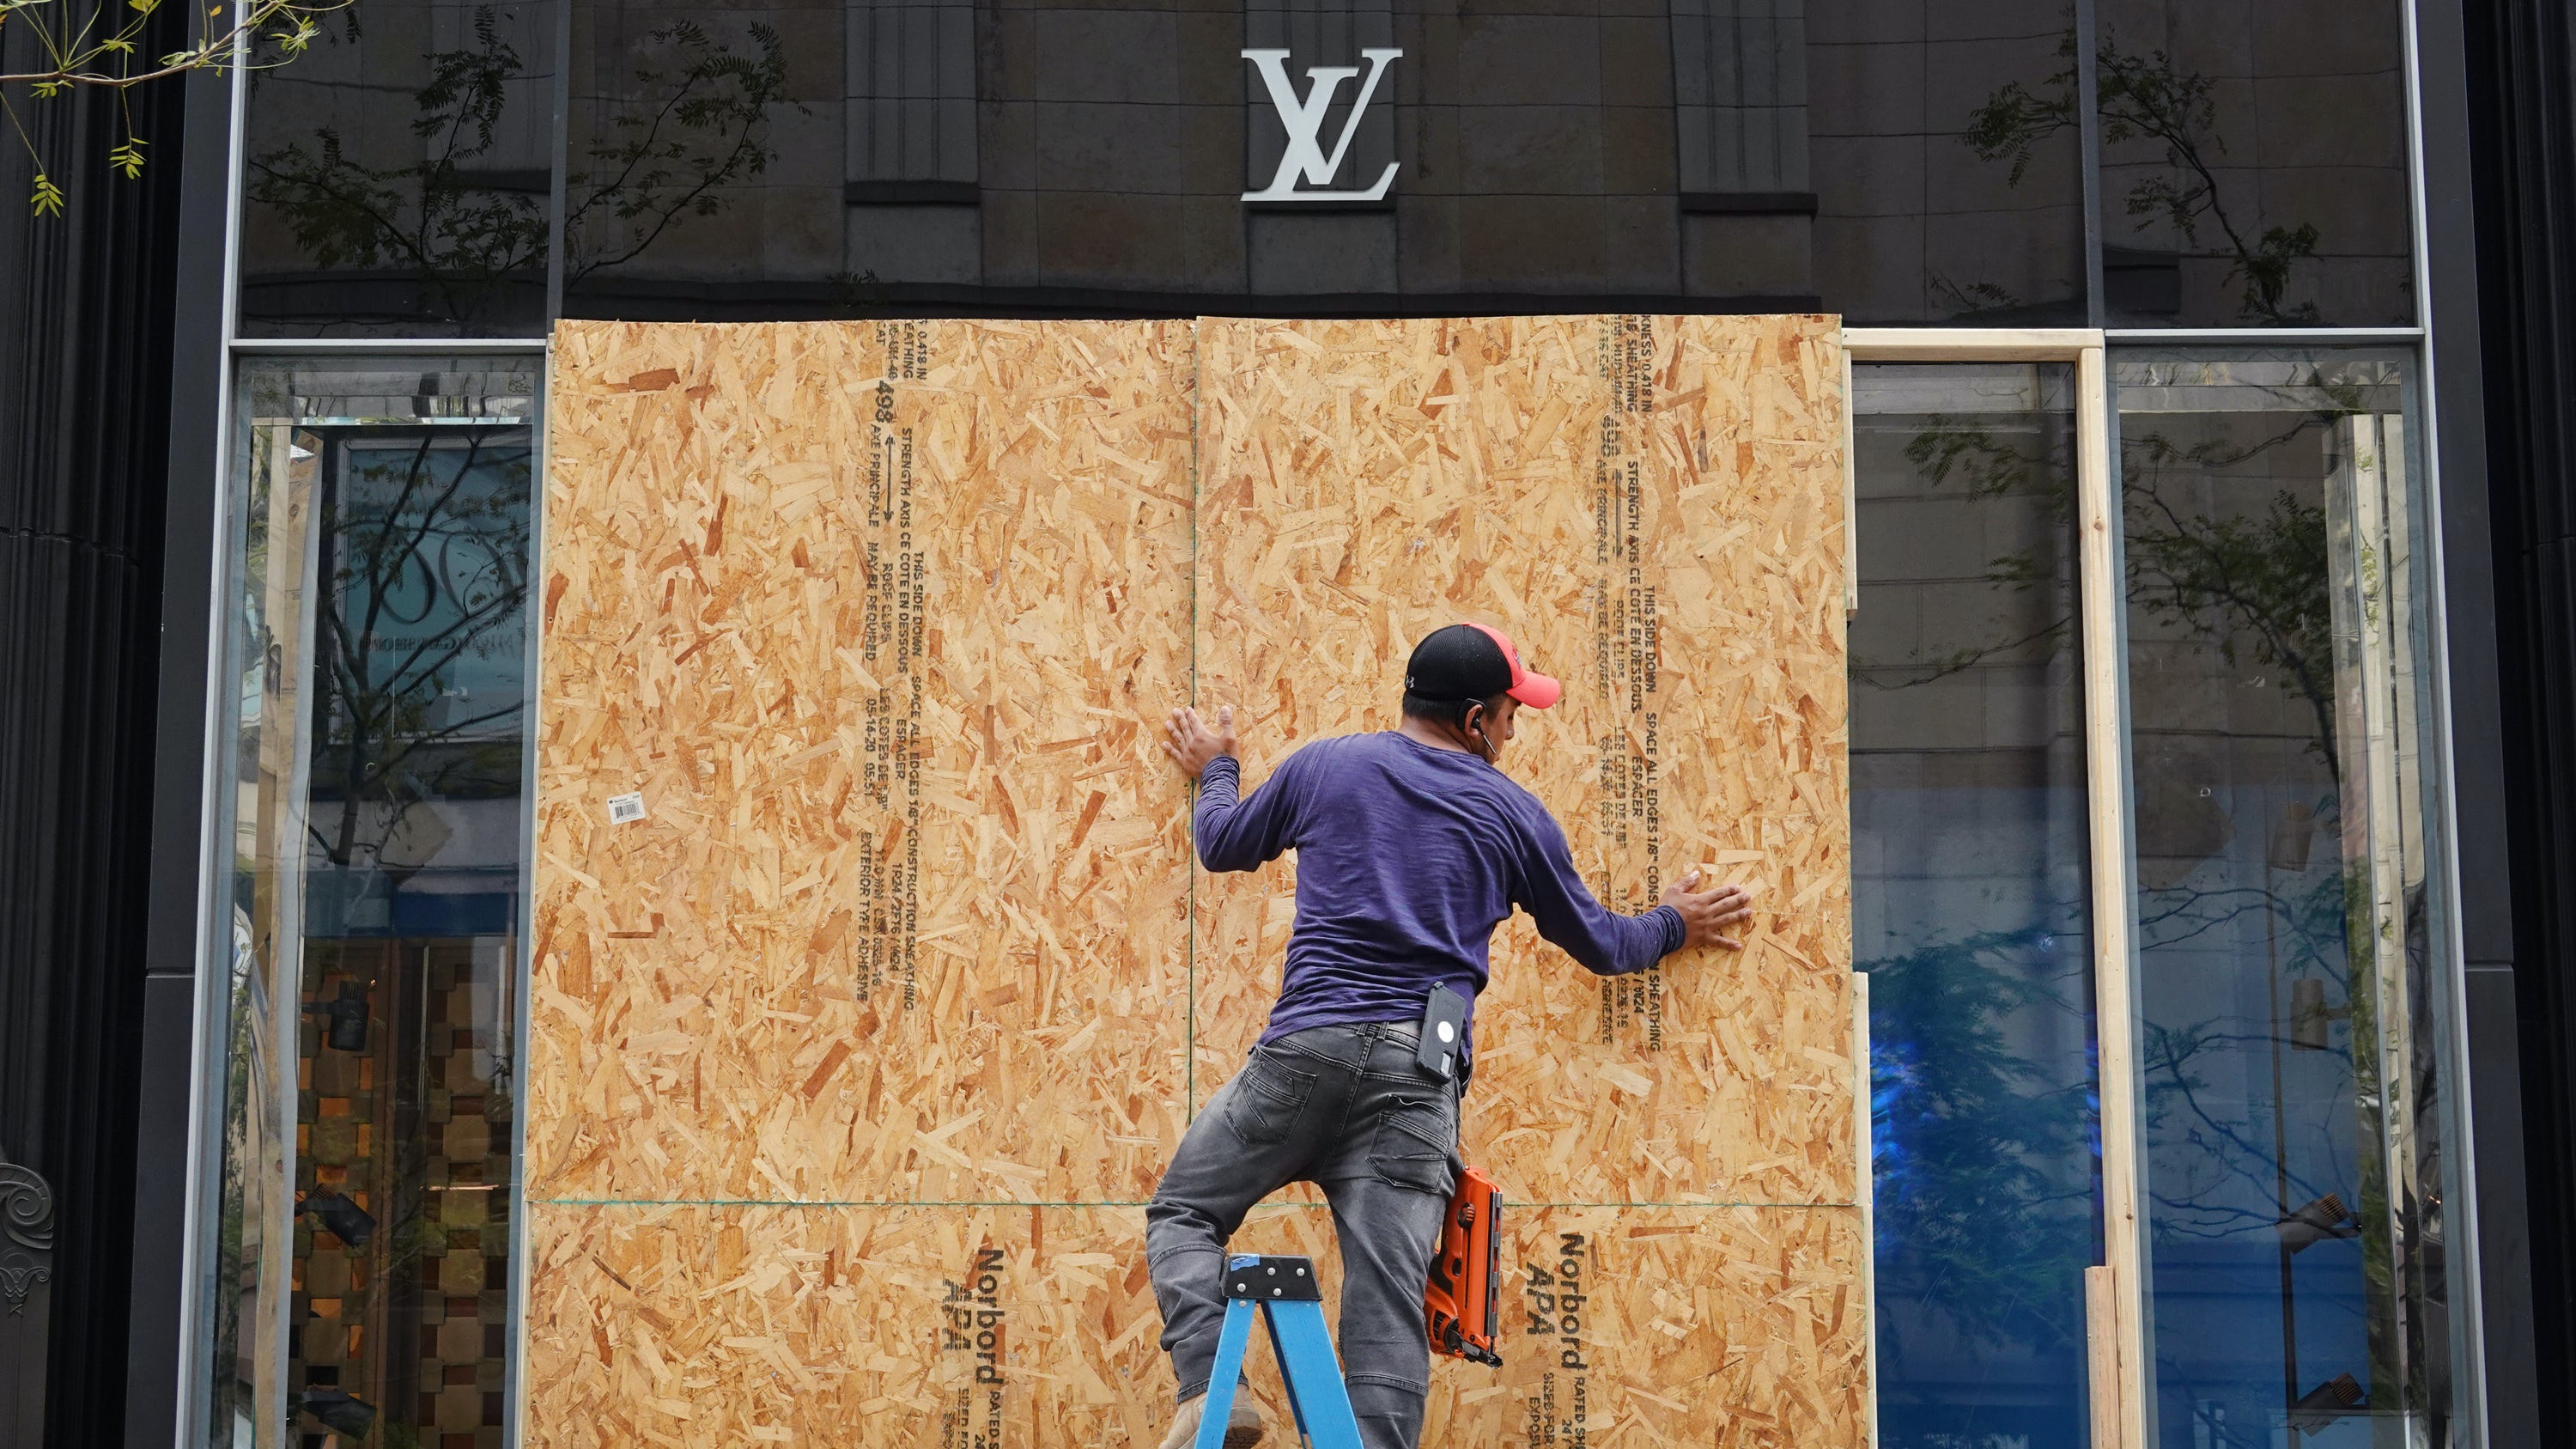 Louis Vuitton Store Getting Looted In Portland Us